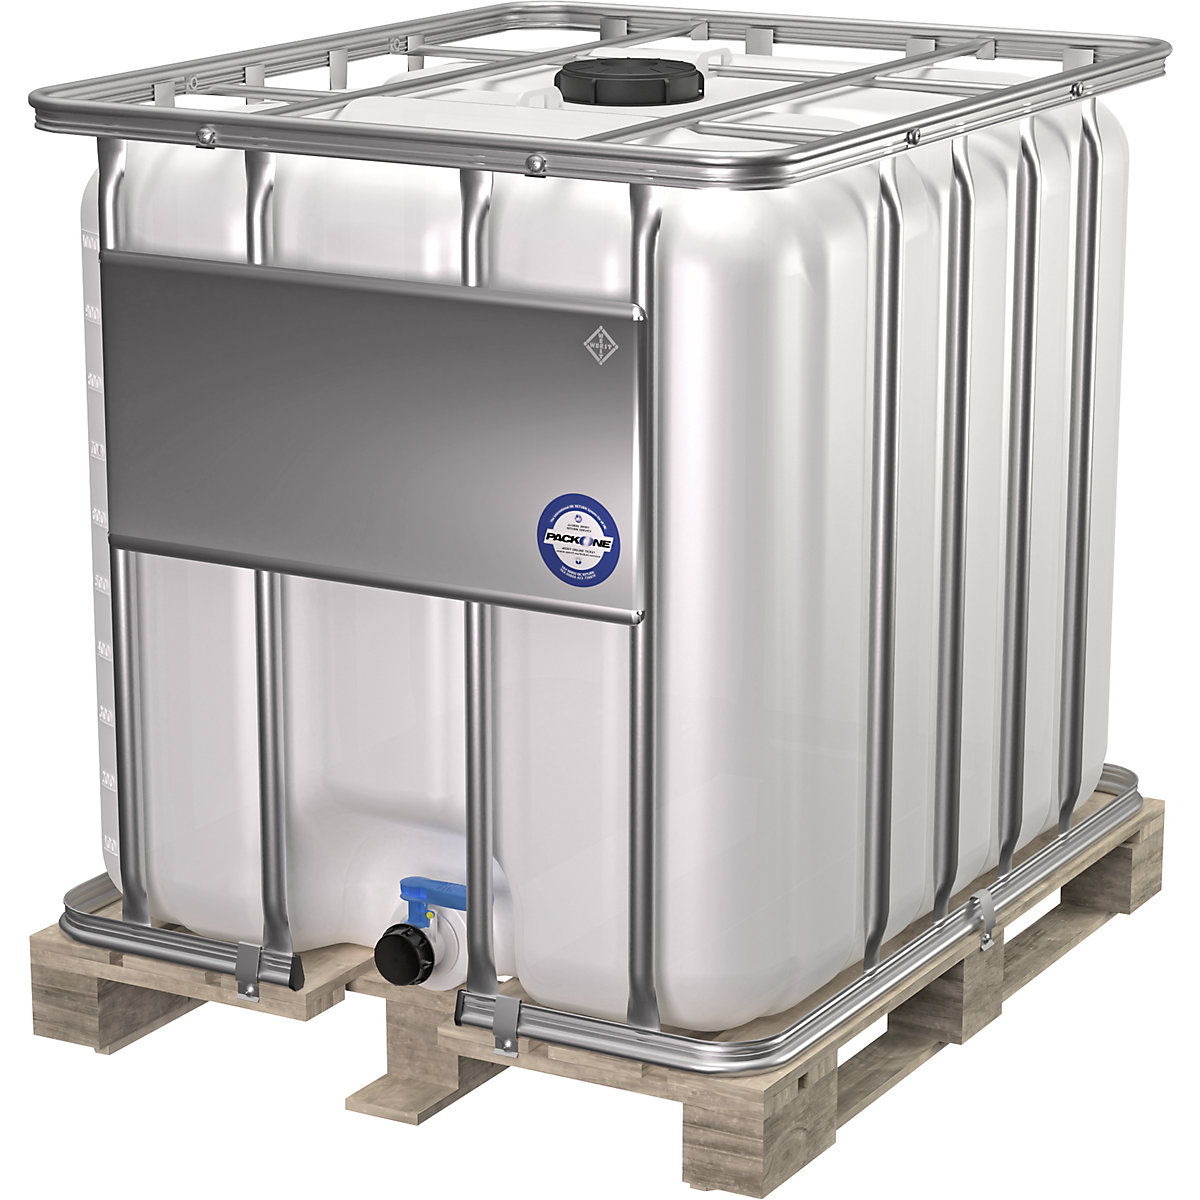 IBC container, standard